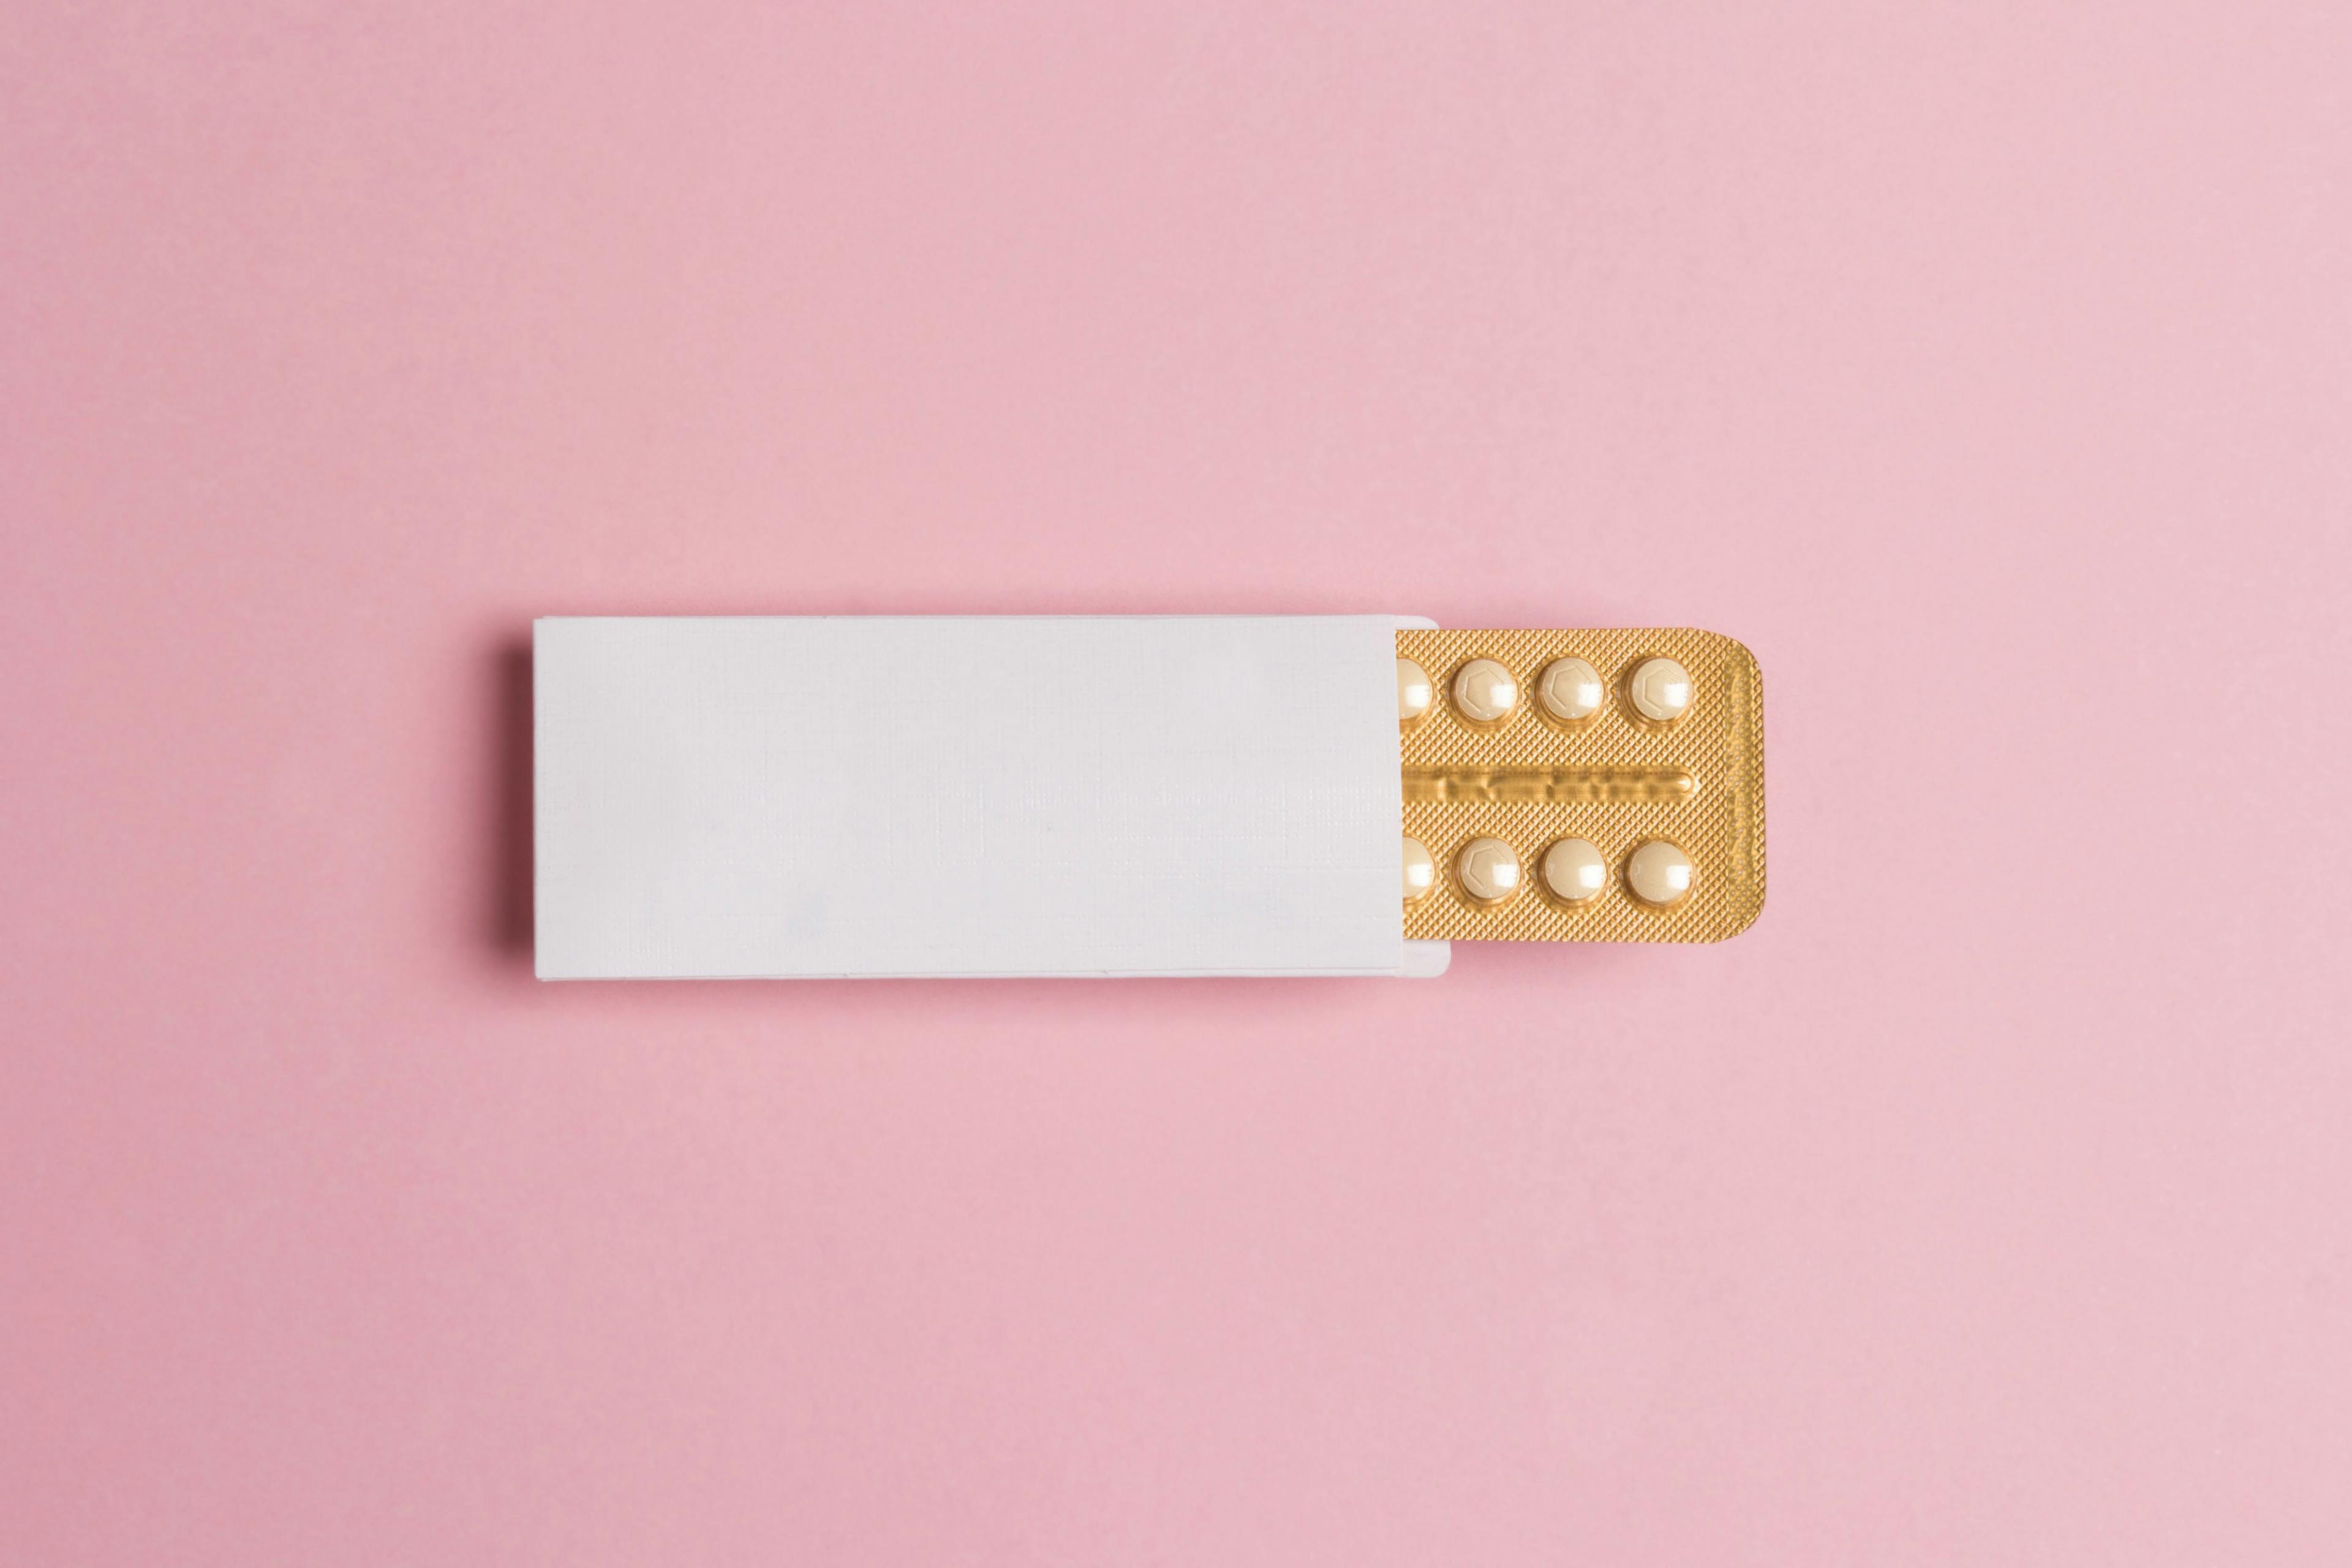 Public confusion on emergency contraceptive pills persists